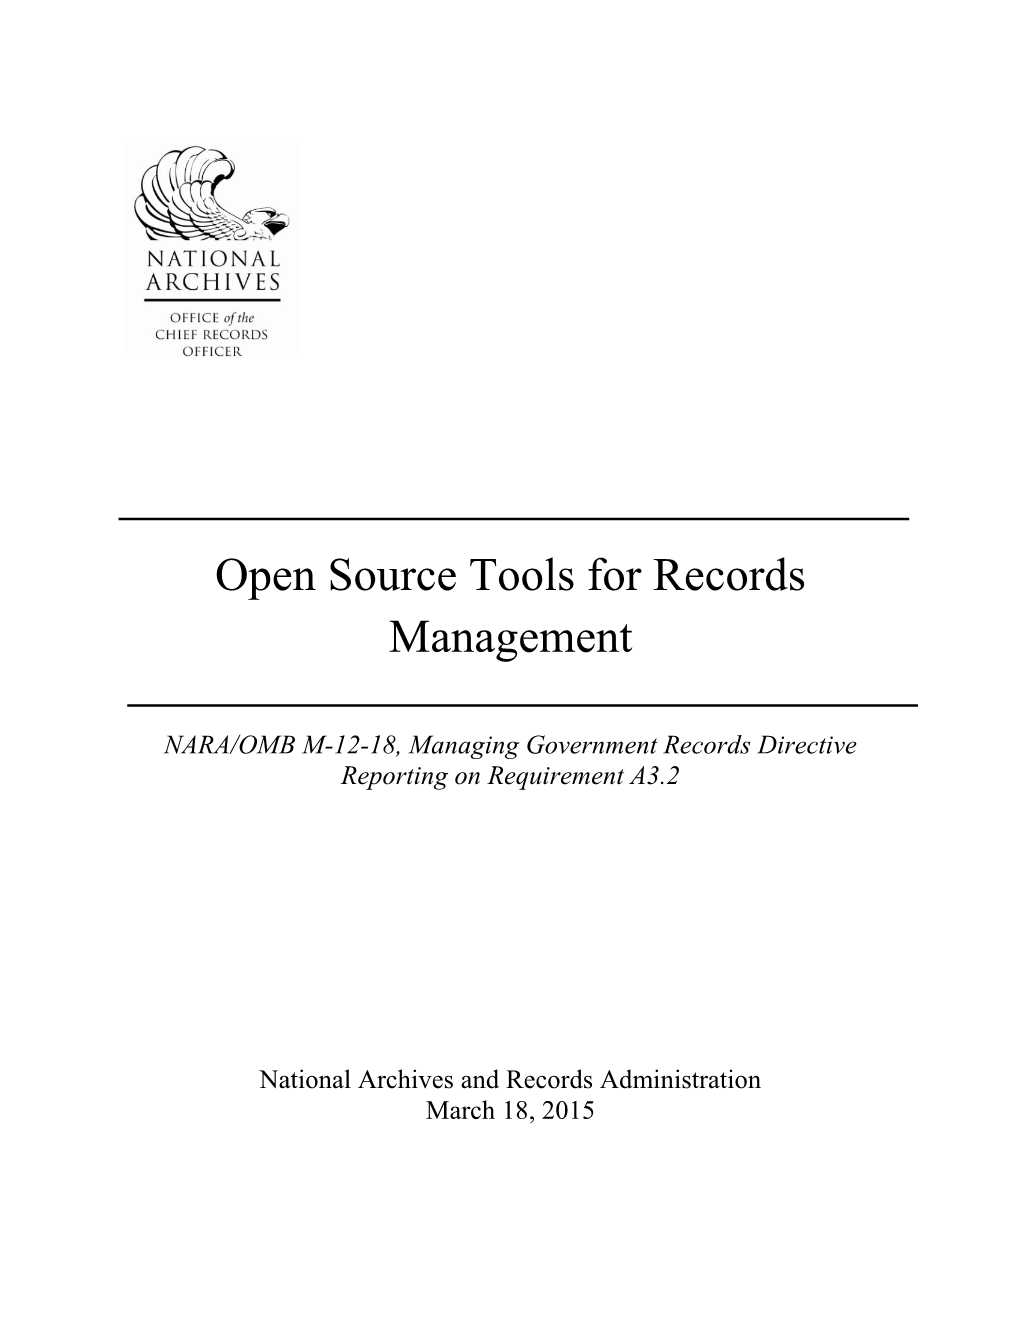 Open Source Tools for Records Management Report